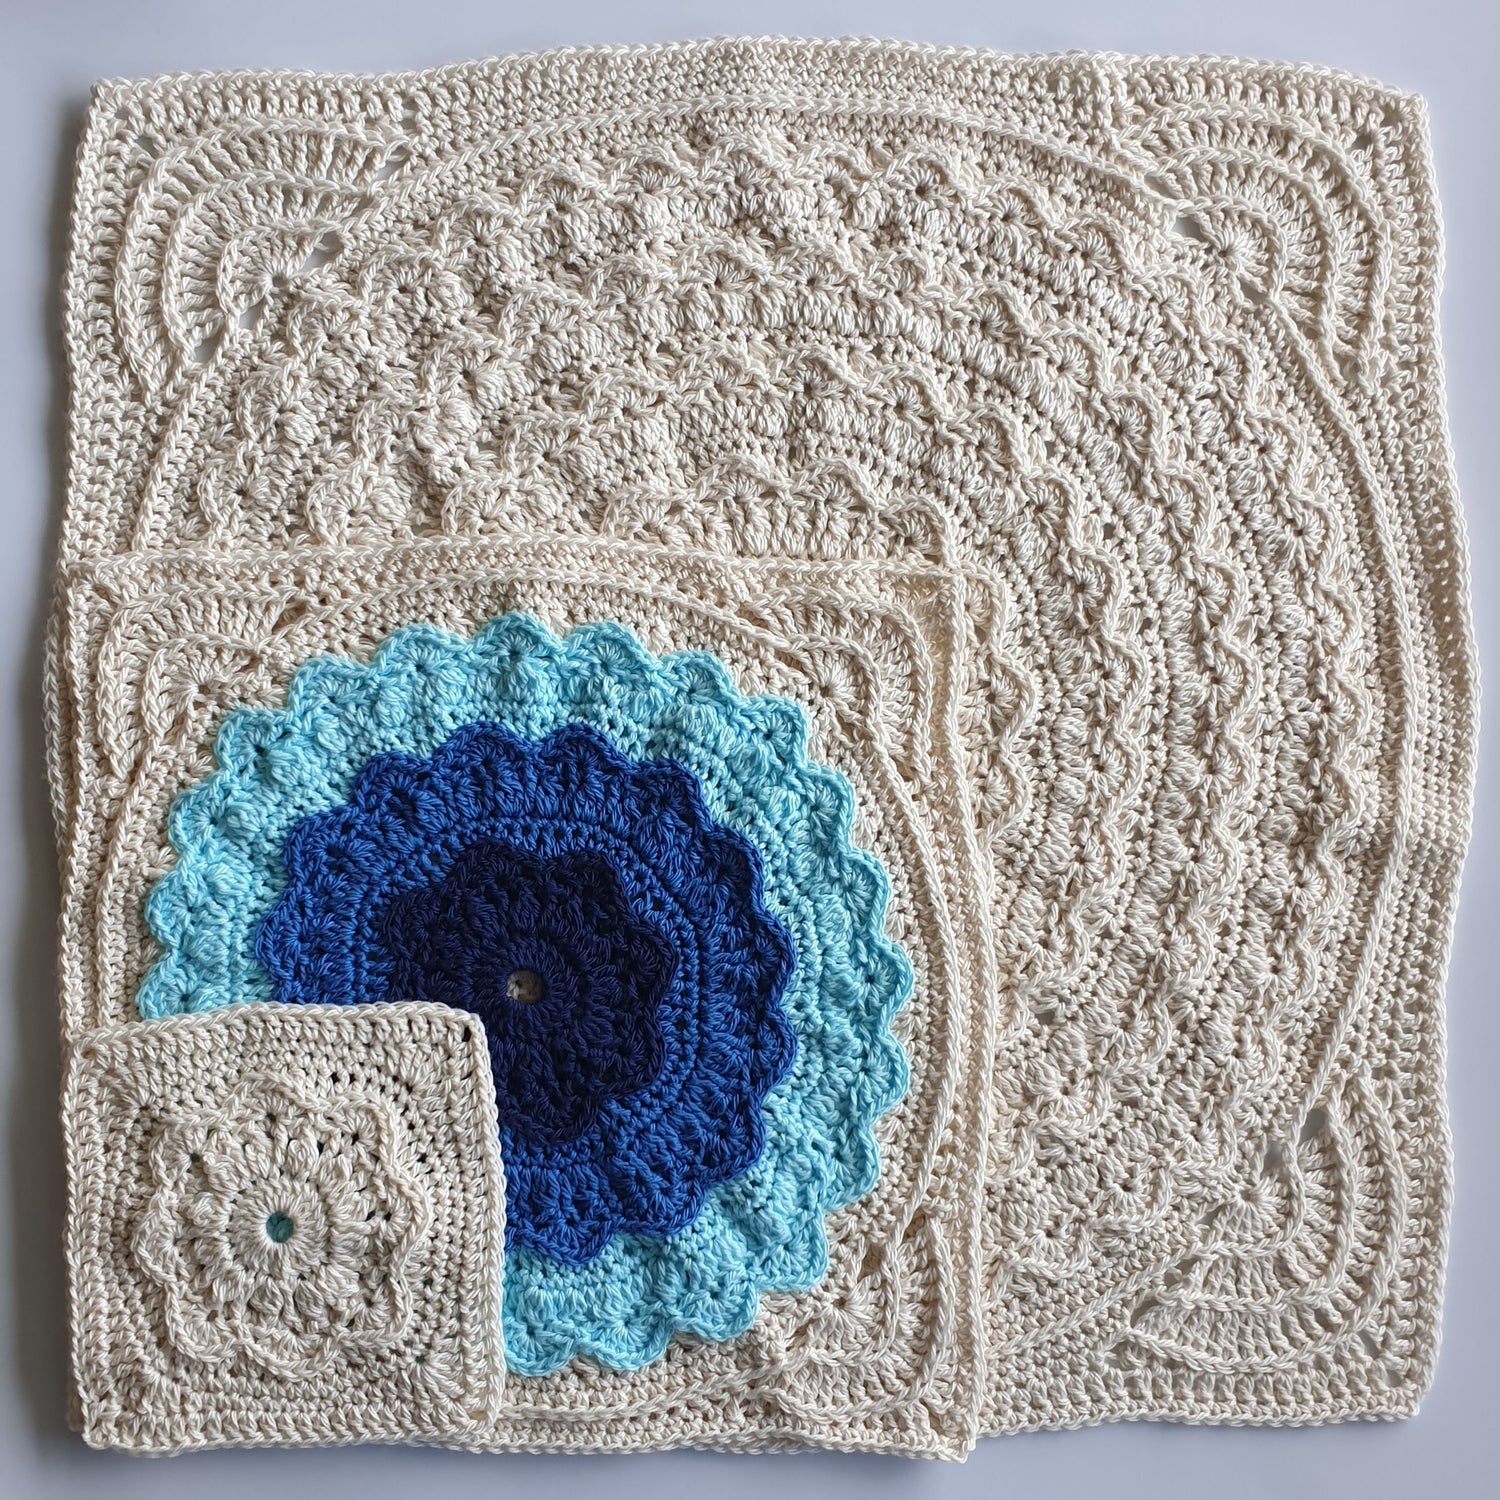 Three Granny squares in different sizes from Manderley Crochet Blanket by Shelley Husband sitting over one another